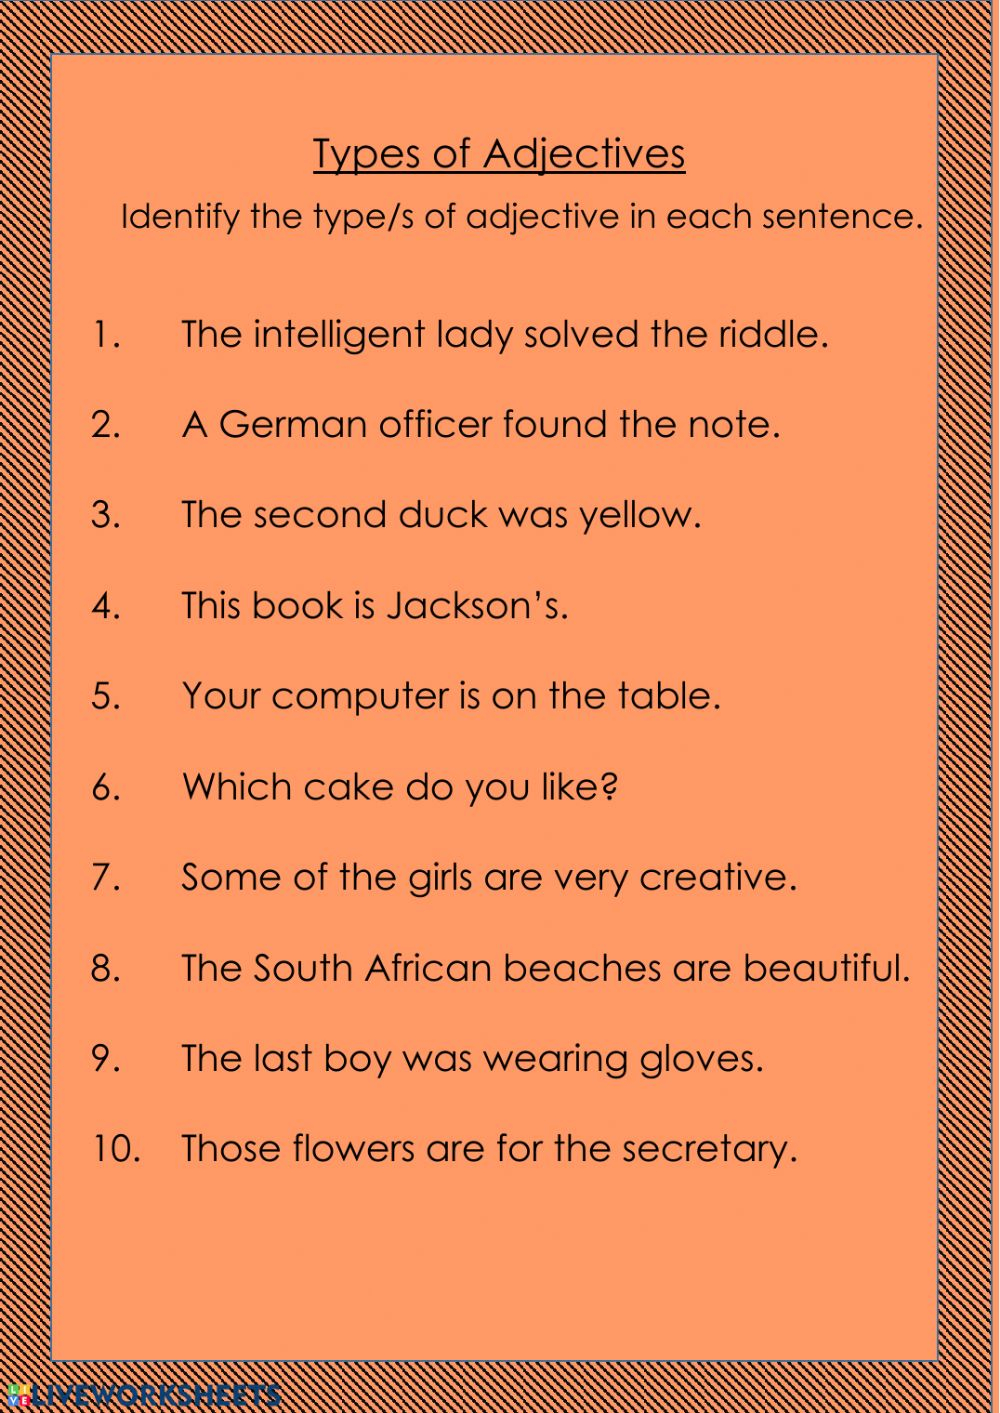 adjective-and-its-types-worksheet-adjectiveworksheets